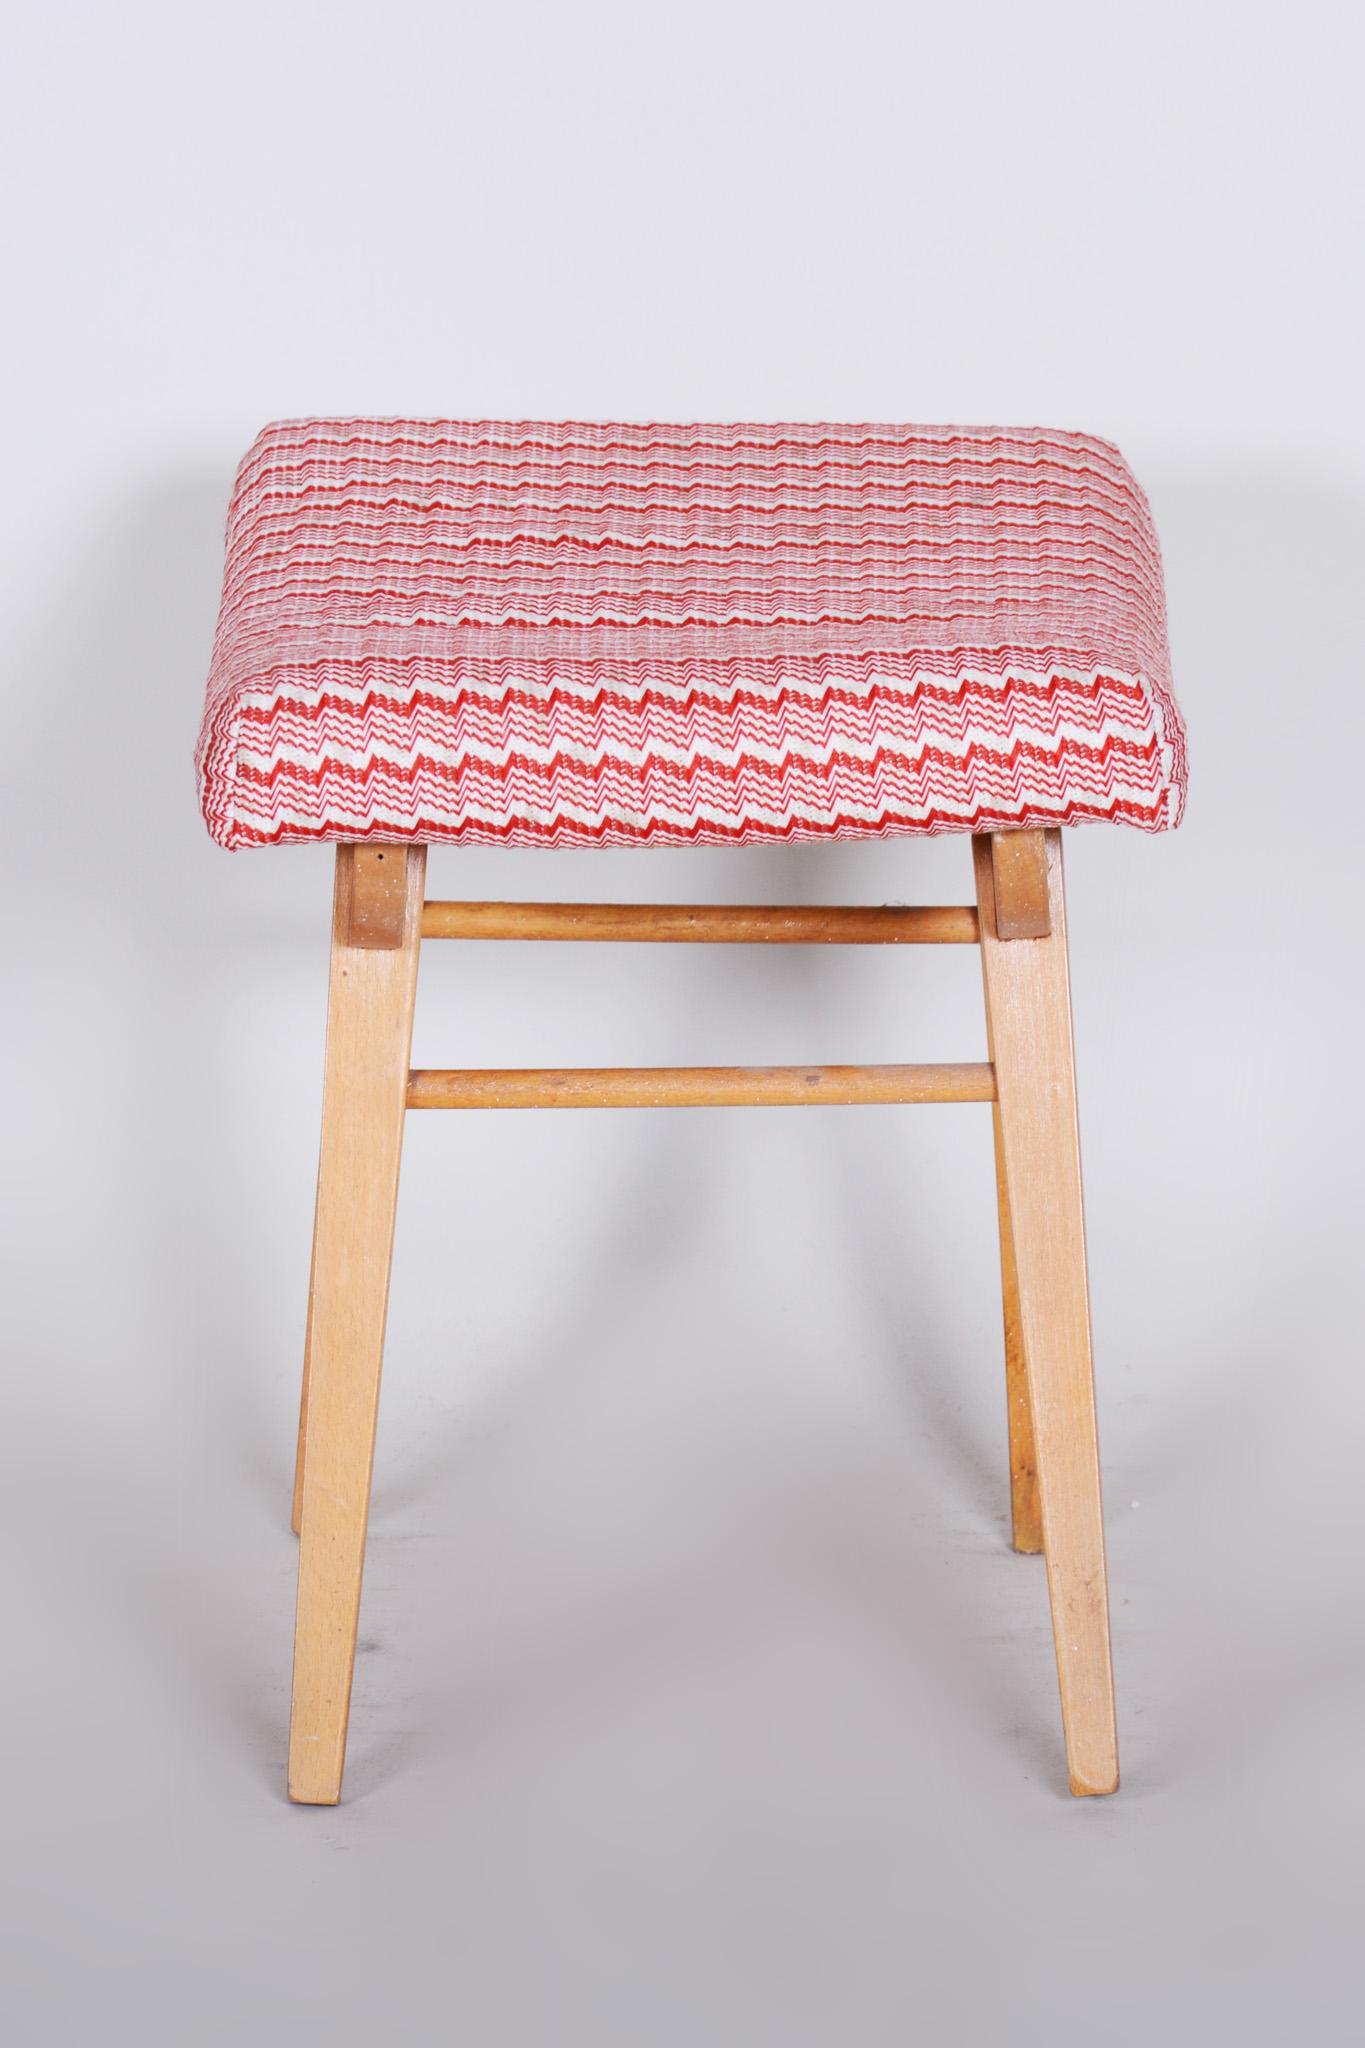 Red and White Midcentury Beech Stool, 1960s, Original Preserved Condition For Sale 1